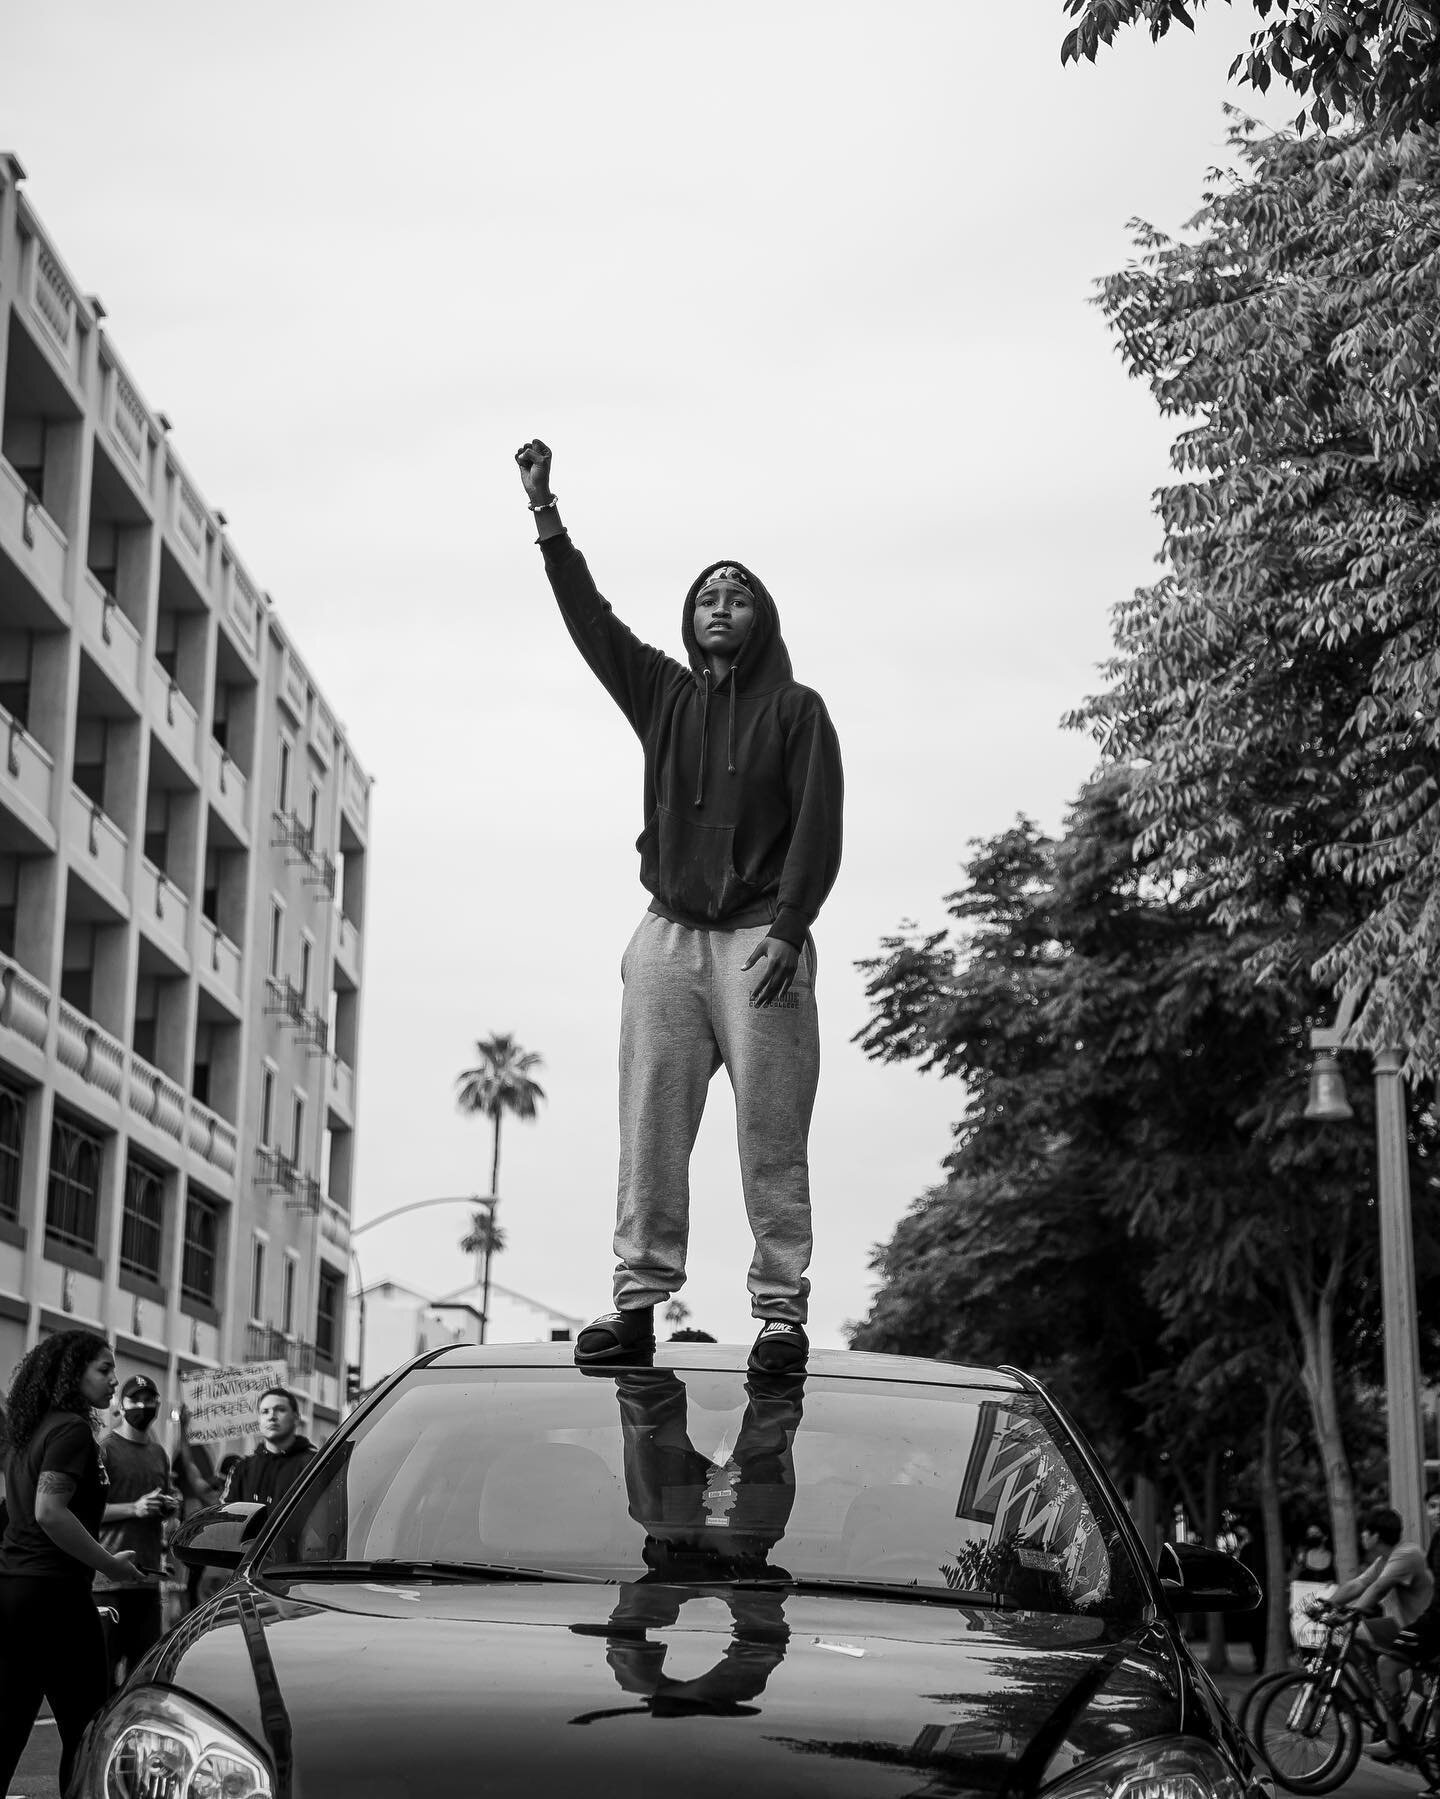 BLM  i. - 6.1.2020
i - this young Black woman stood on her car speaking words of encouragement and uplift everyone around her while holding her first in the air the whole time✊🏽
ii - &quot;White silence = Violence&quot;/&quot;Hands up, don't shoot&q